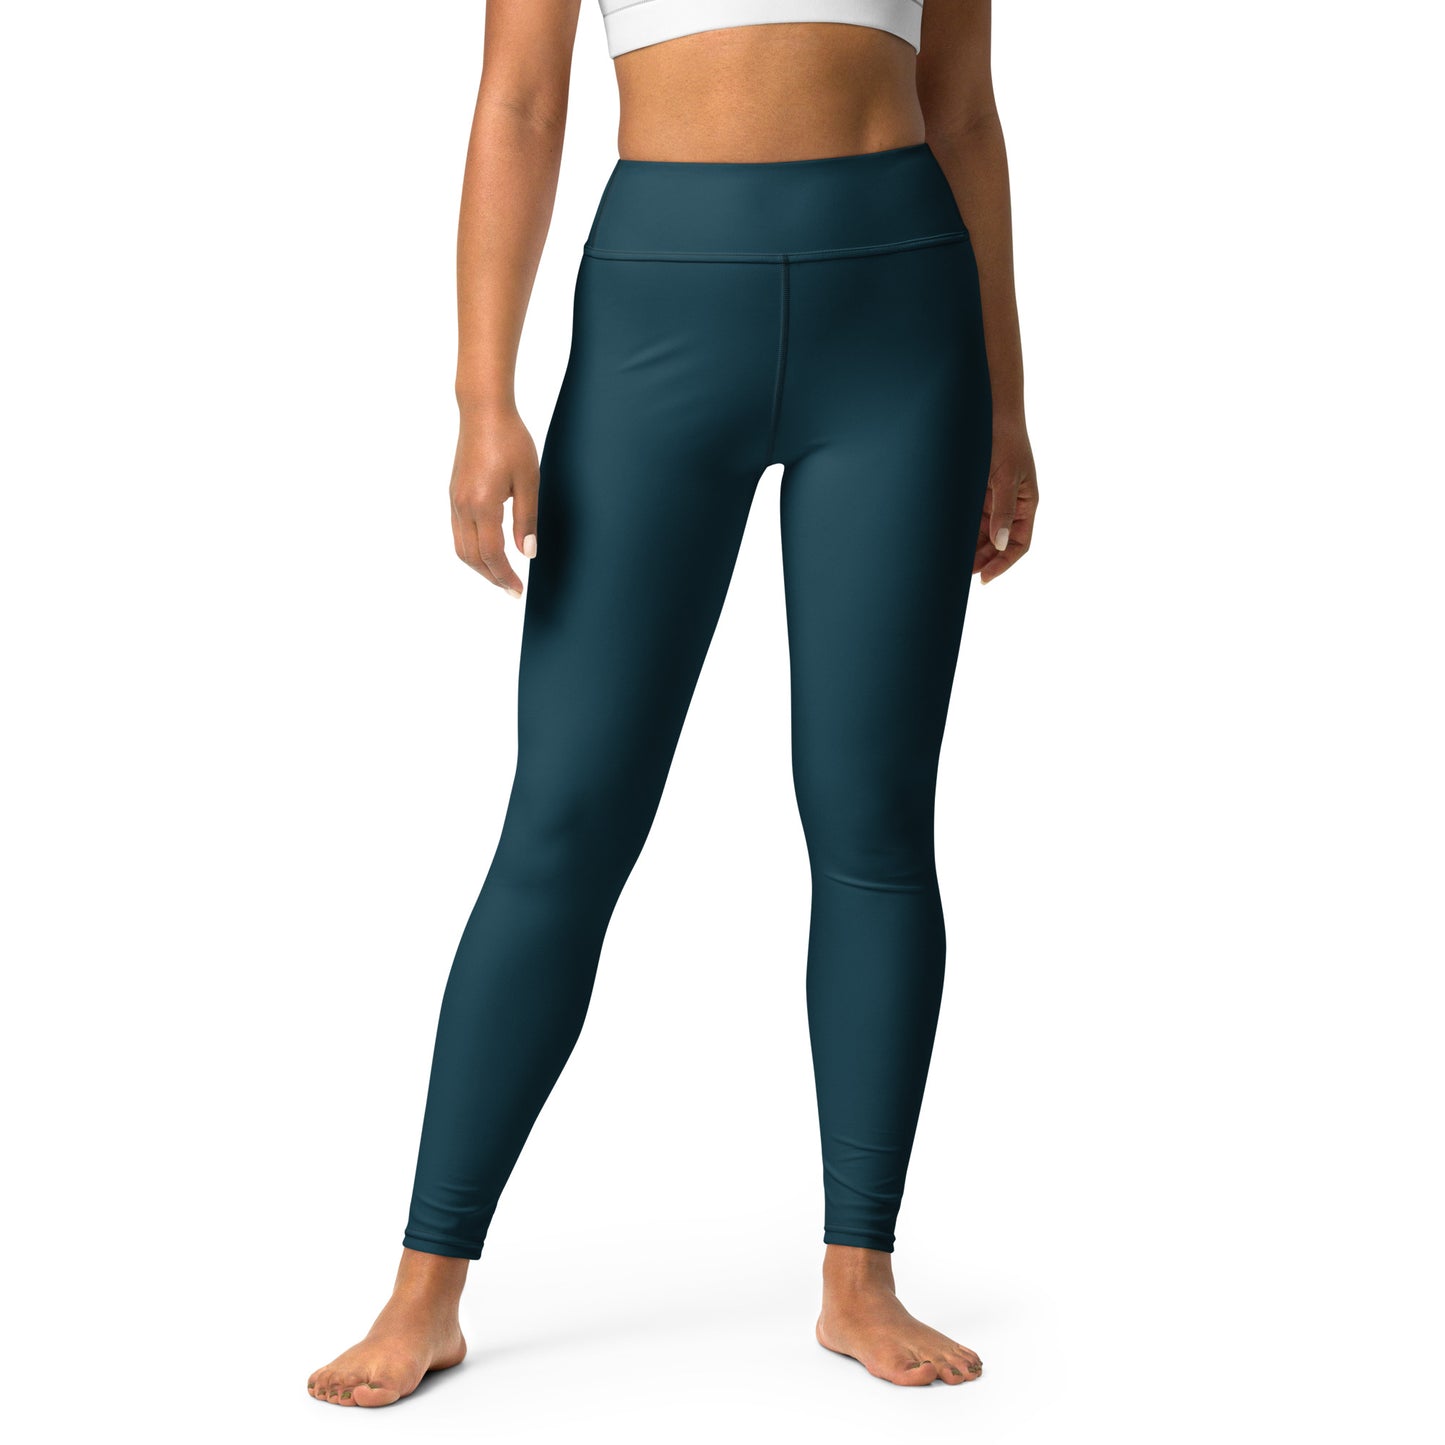 Blue whale yoga leggings with pocket